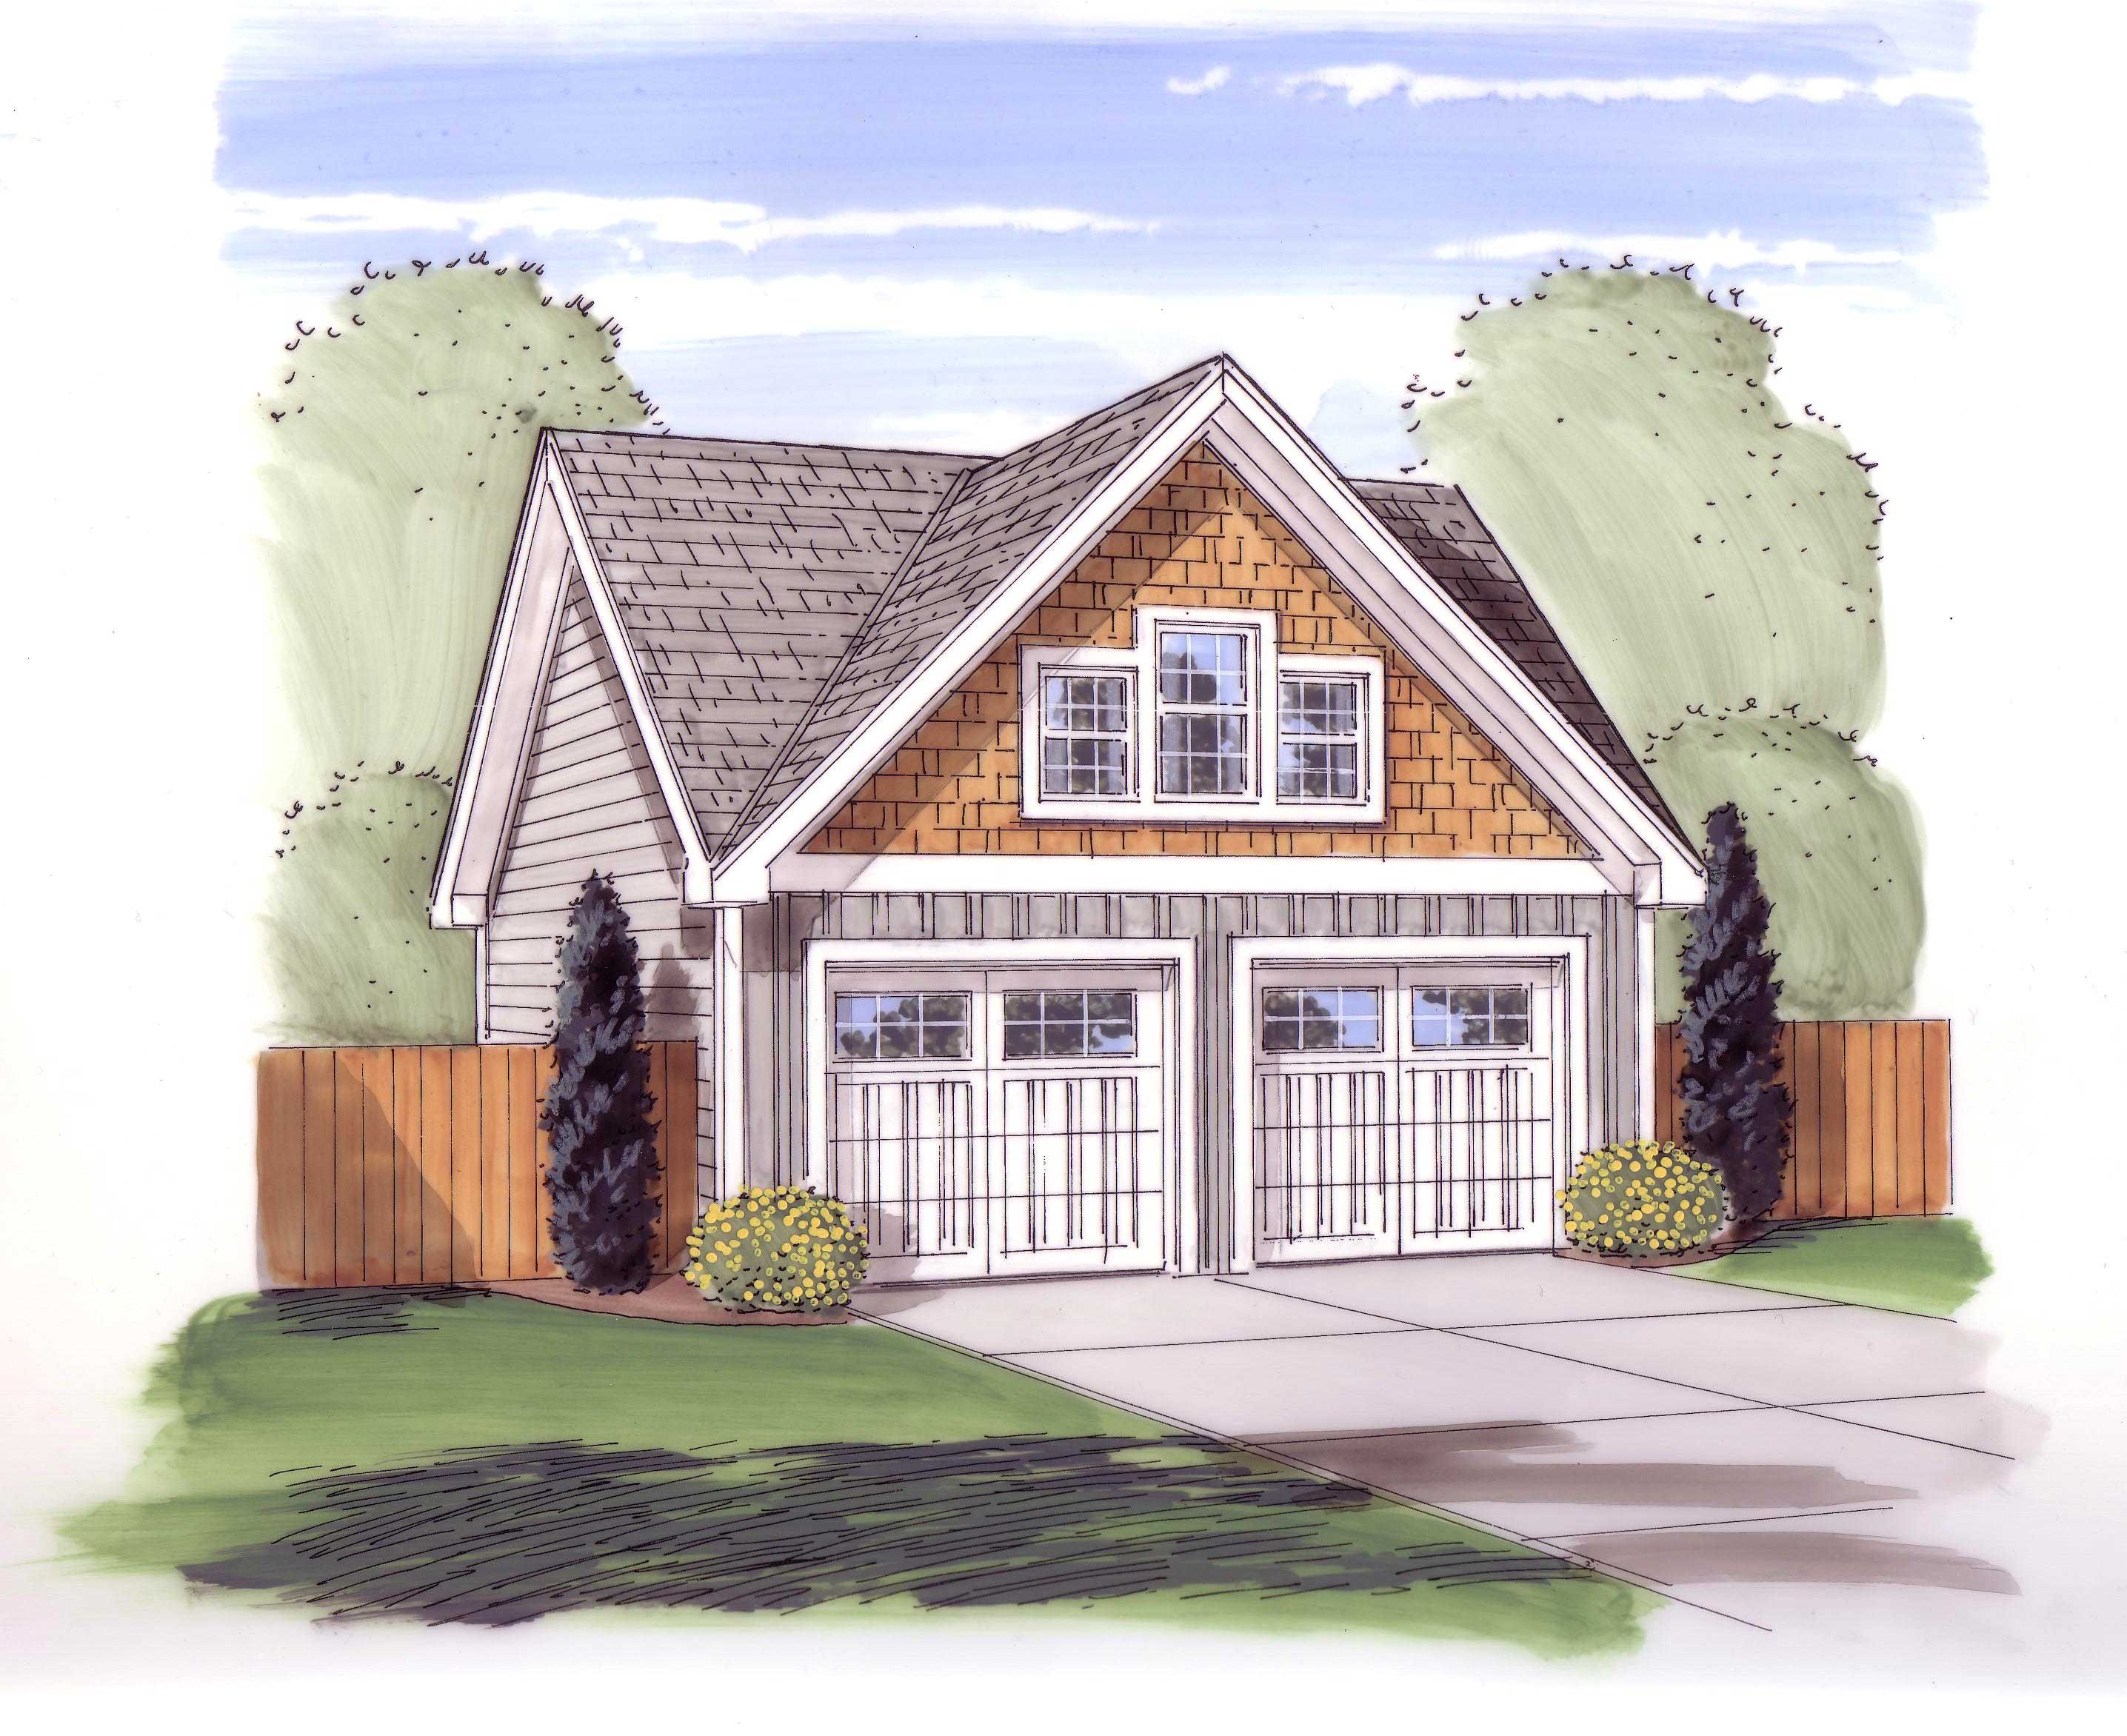 Carriage House Type 3 Car Garage With Apartment Plans. : 3 Car 2 Story Apartment Garage Plan 1632 1 35 2 X 24 : Like a carriage house, our garage apartment plans usually include fully designed living space on the upper level.